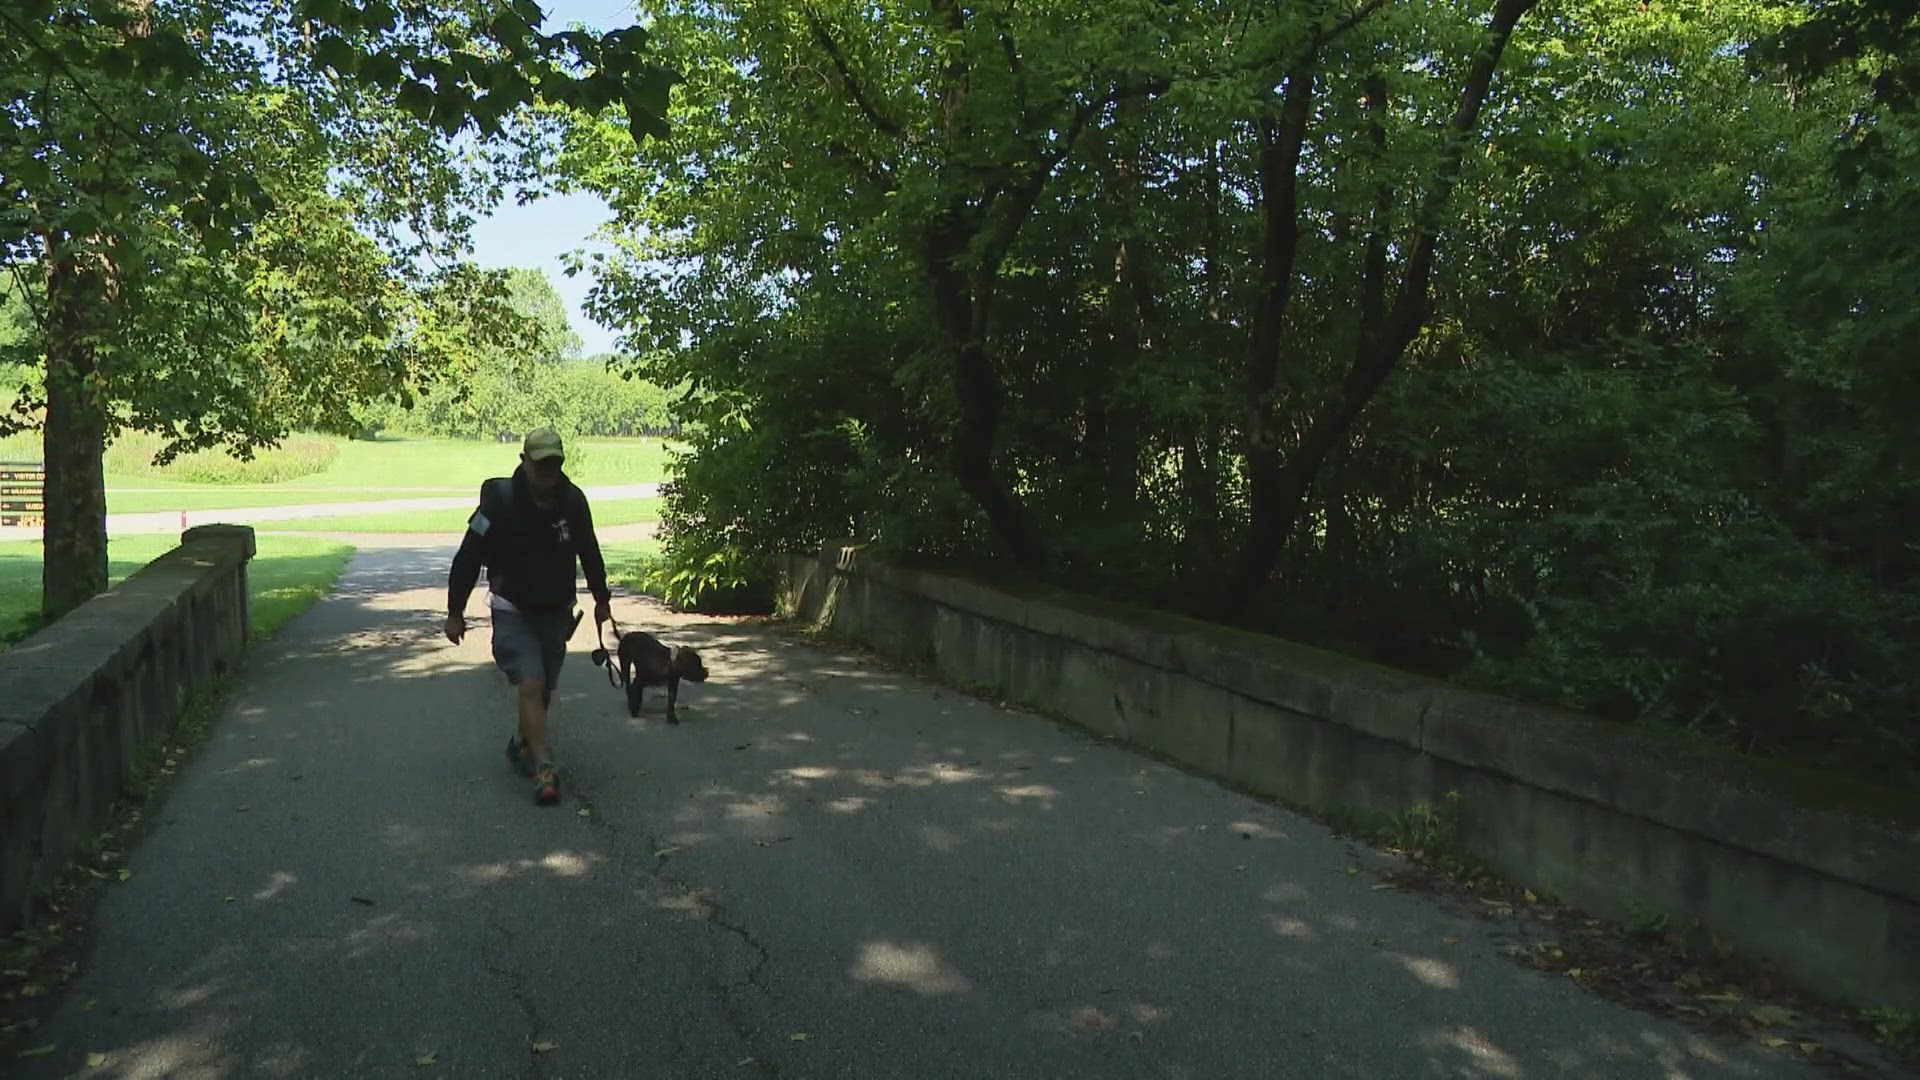 In Lawrence there's a big plea for more trails. The city's working on it and hoping the money comes through for a big project that would mean a giant step forward.